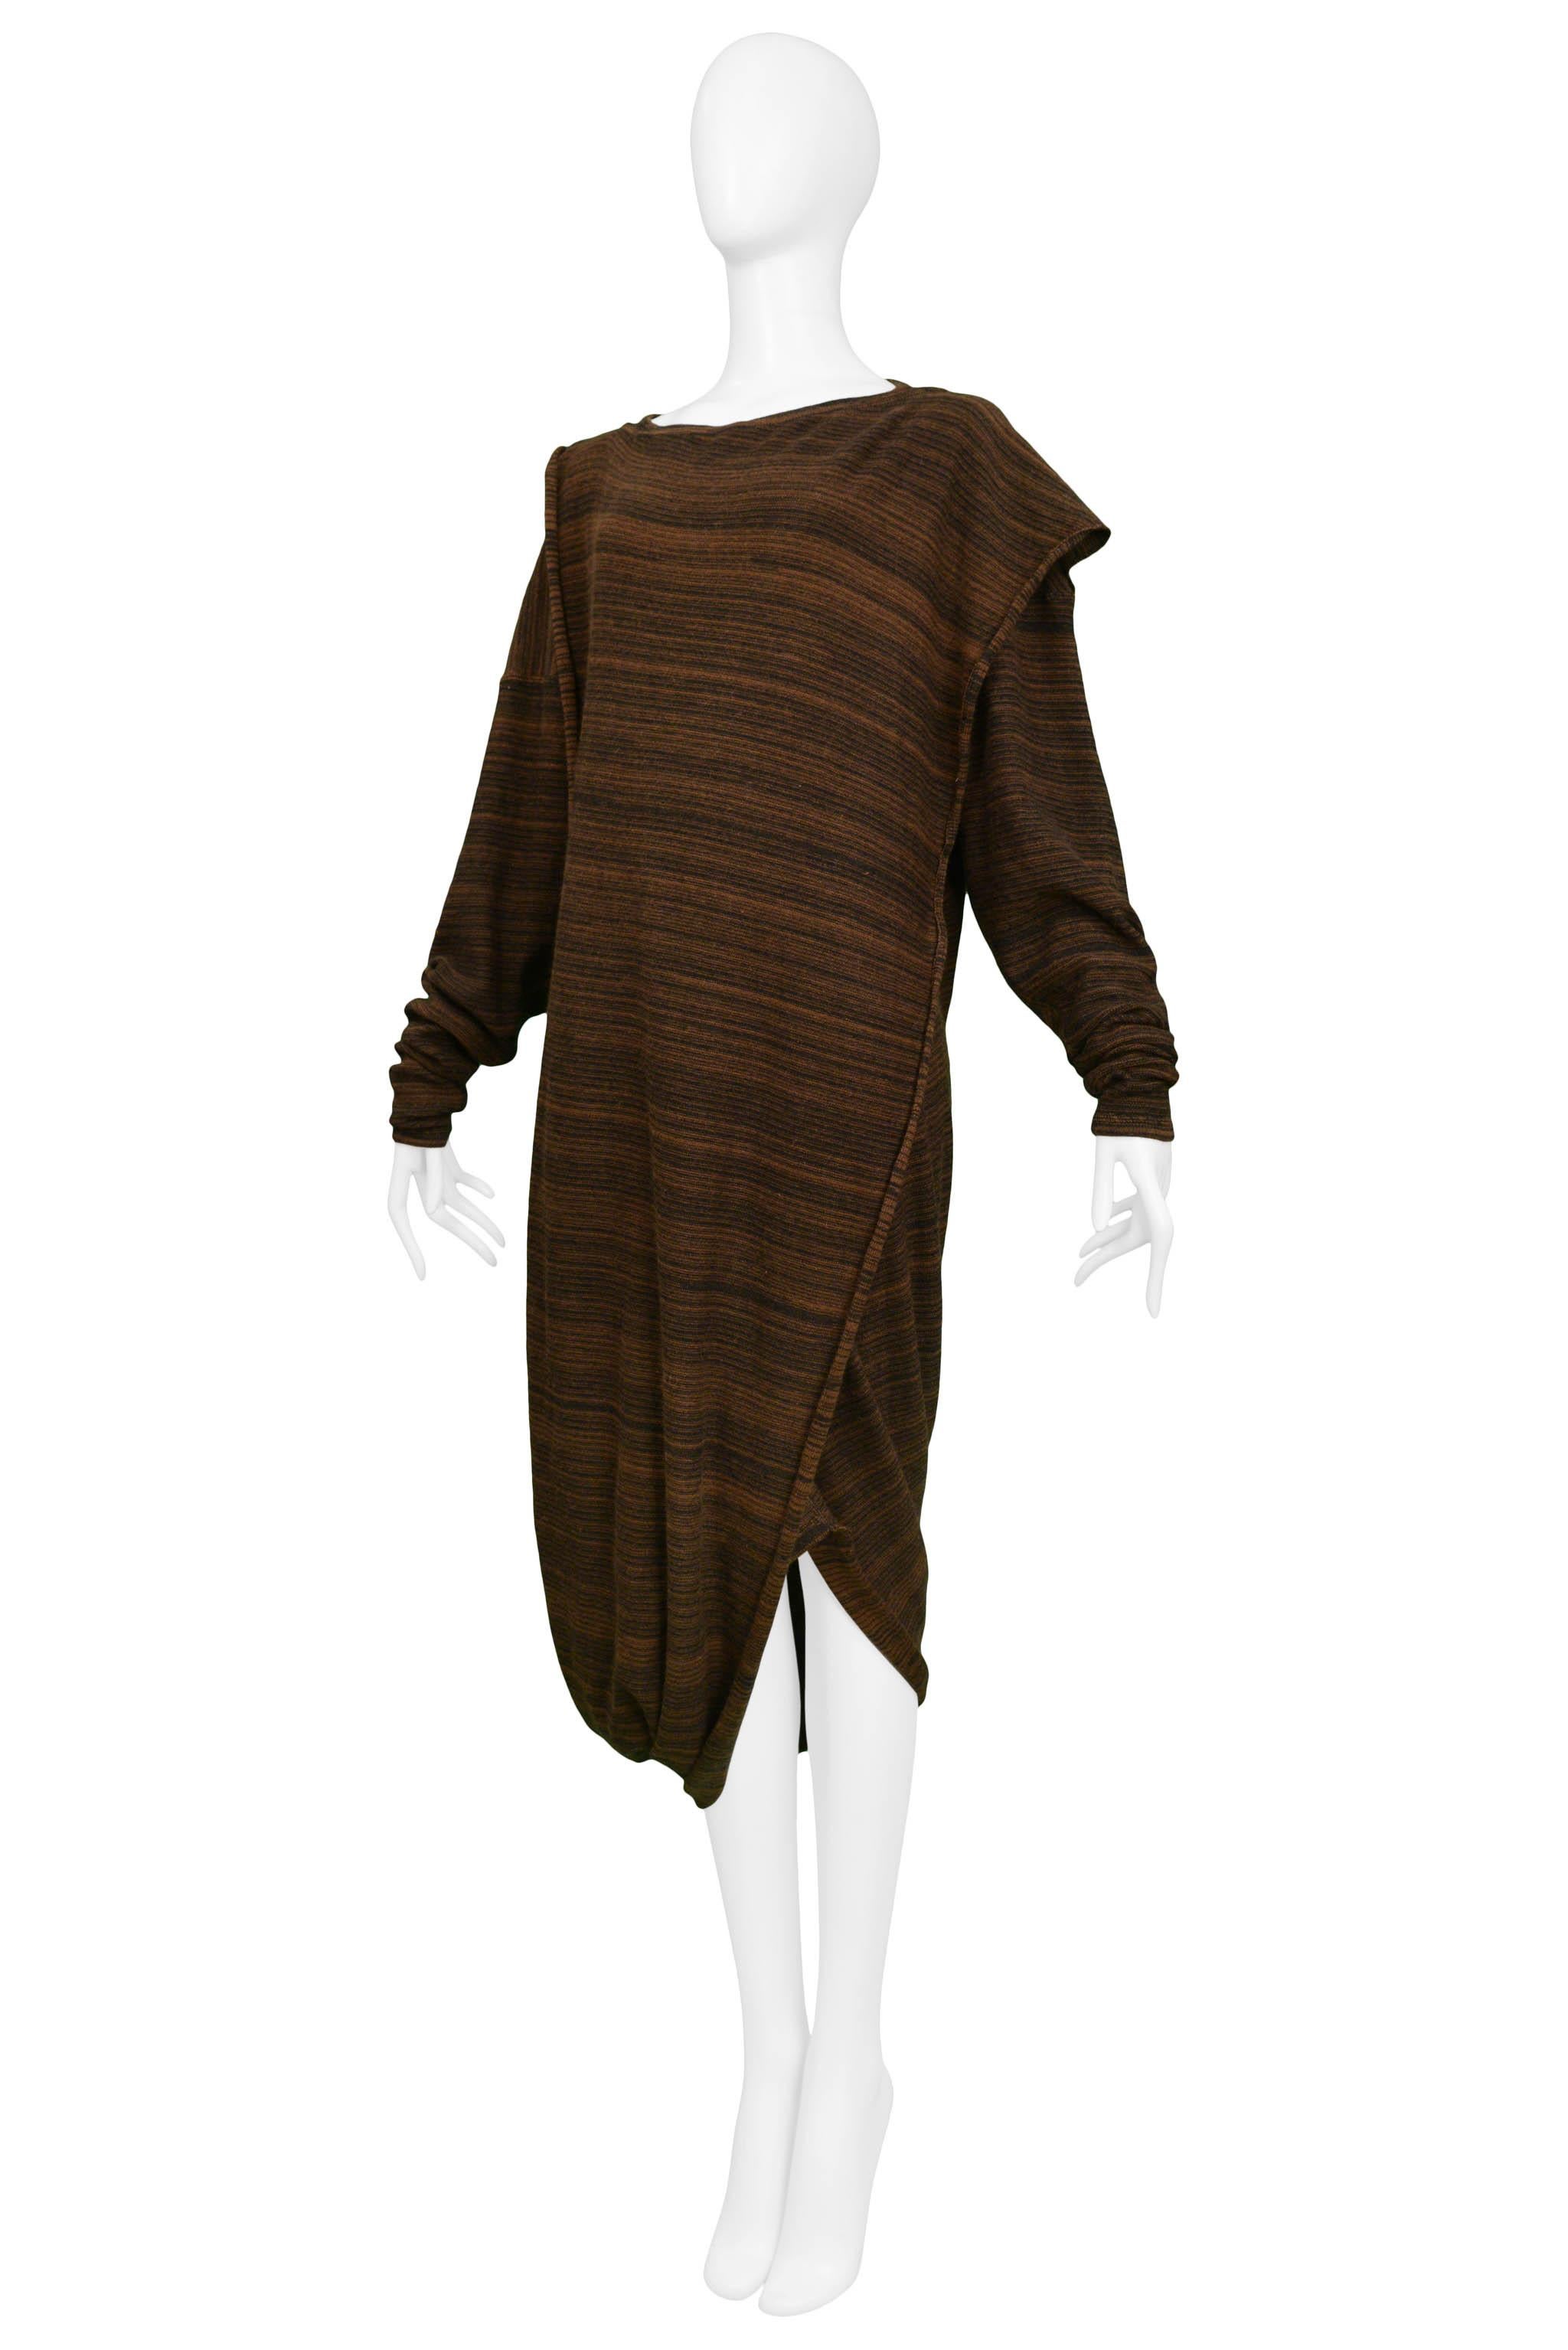 Issey Miyake Brown & Black Stripe Toga Knit Dress In Excellent Condition For Sale In Los Angeles, CA